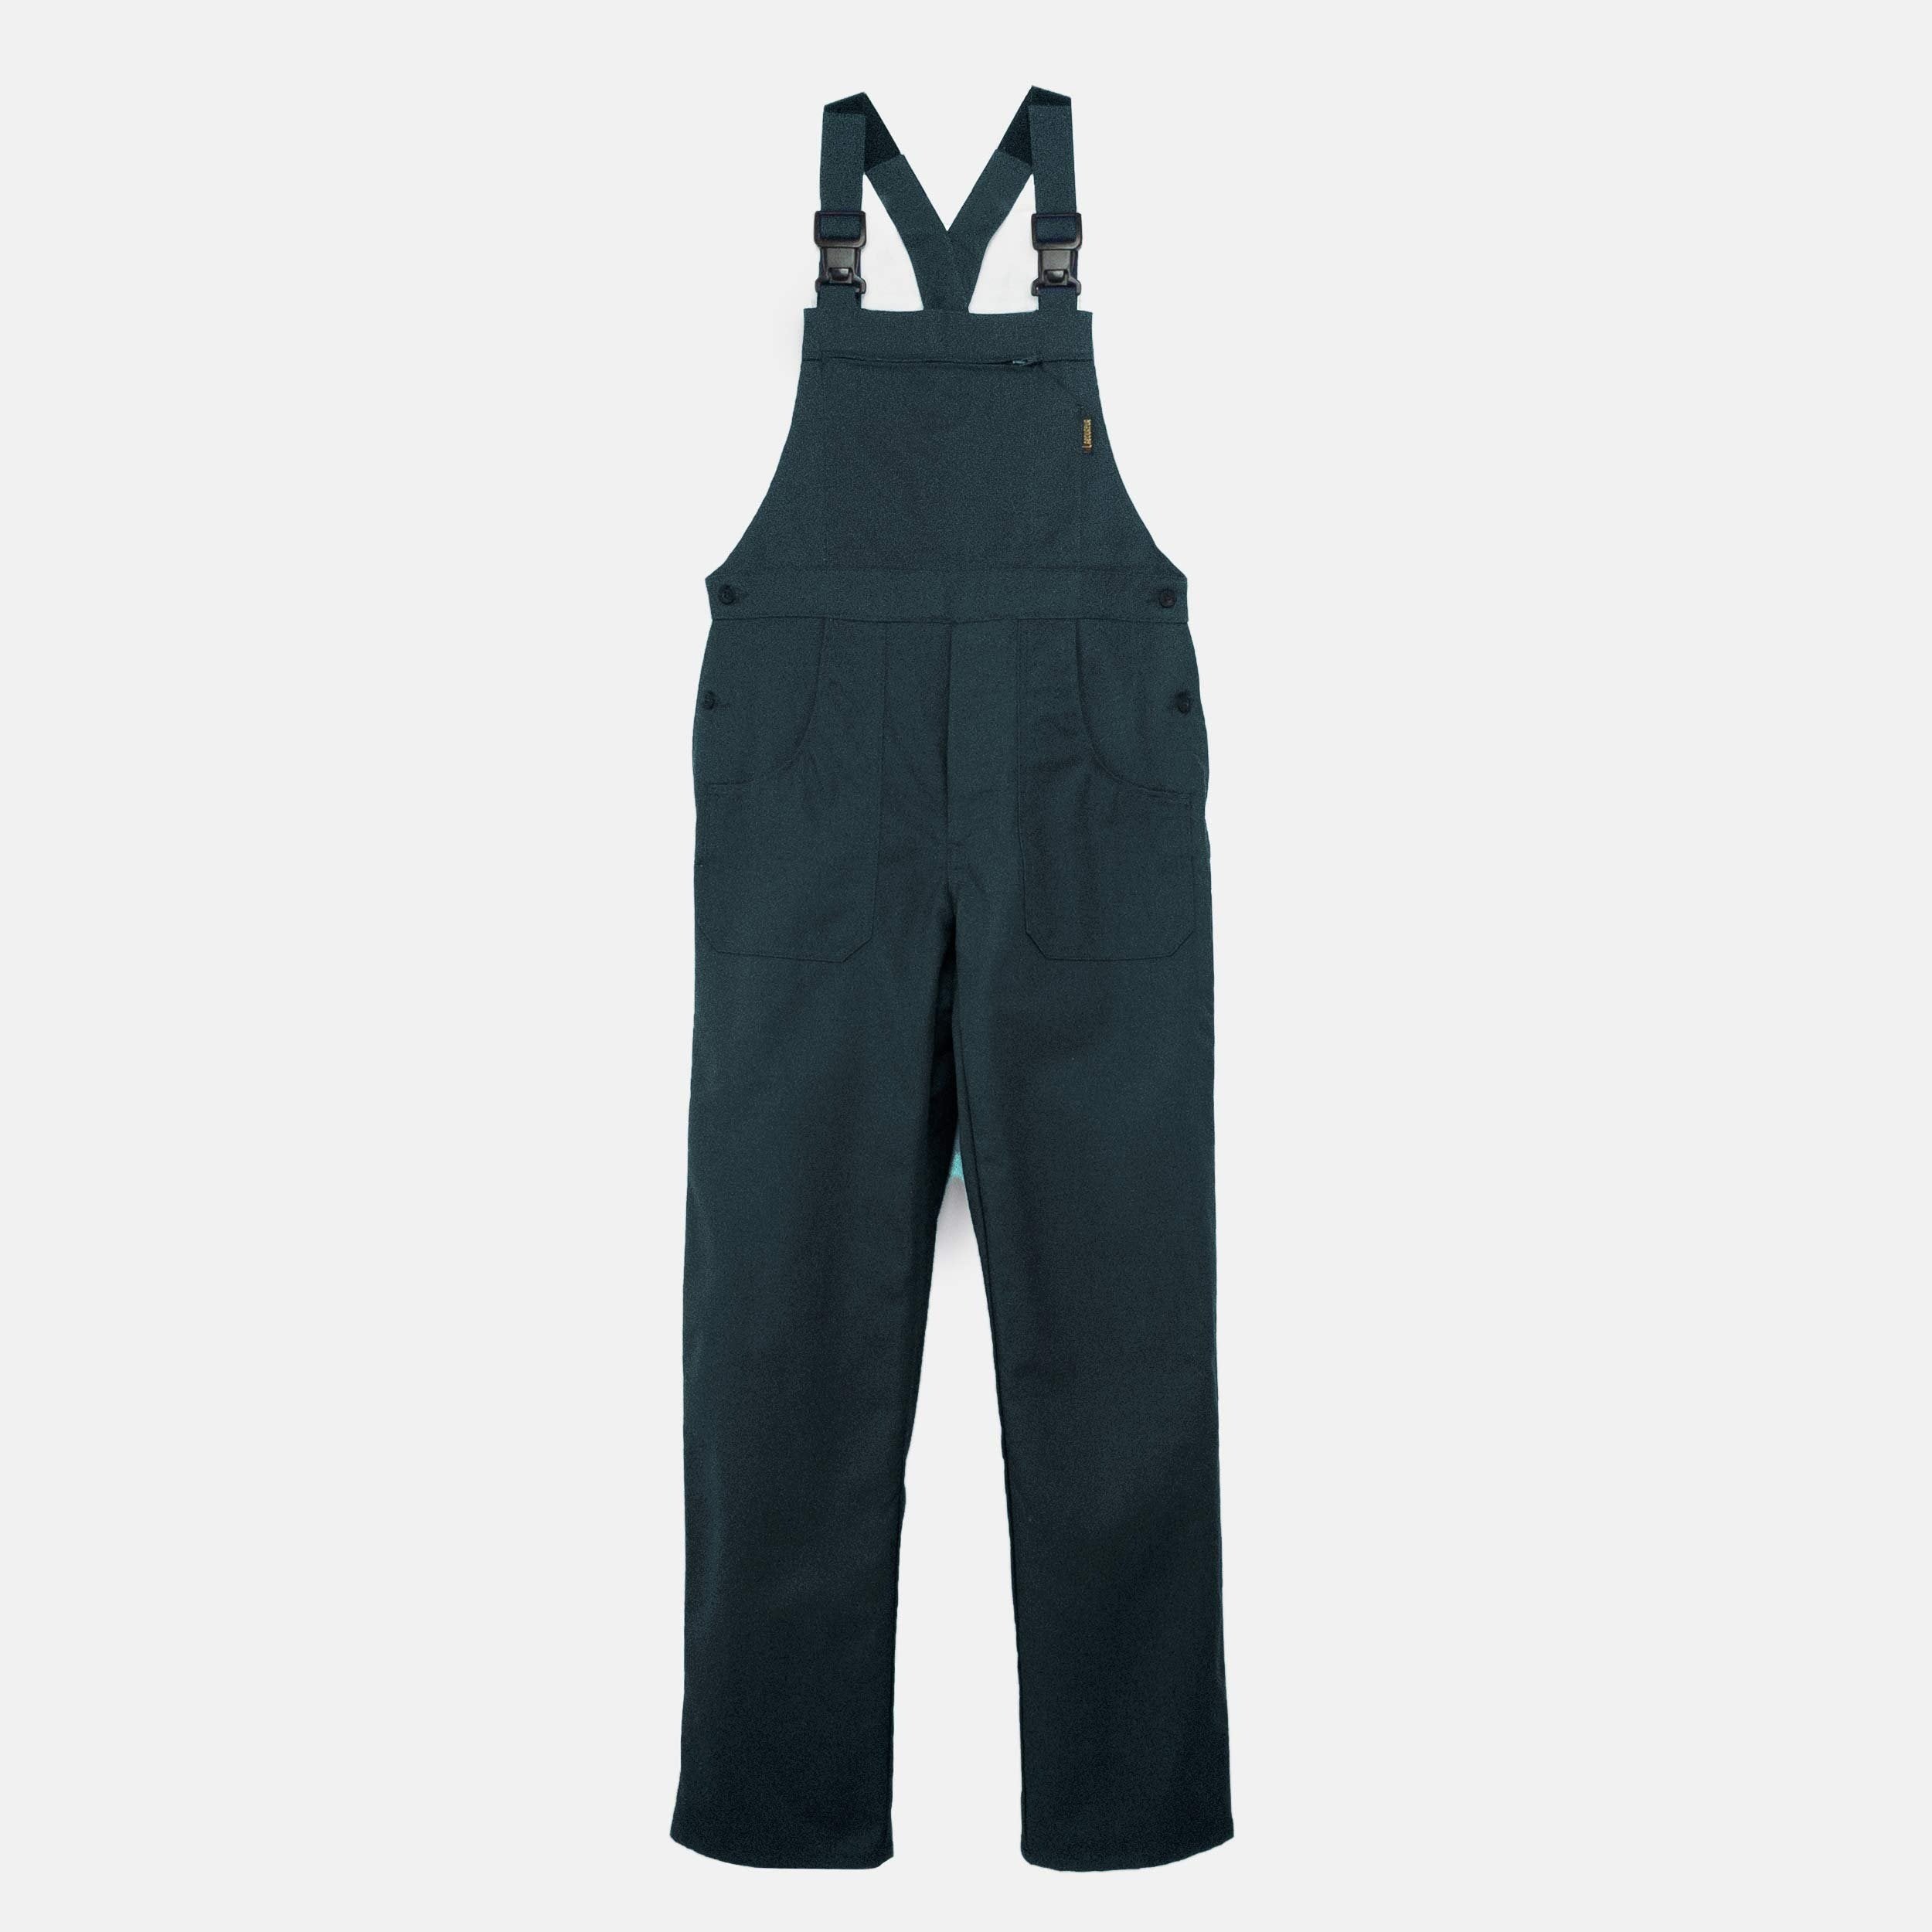 Le Laboureur French Cotton Blend Overalls in French Green